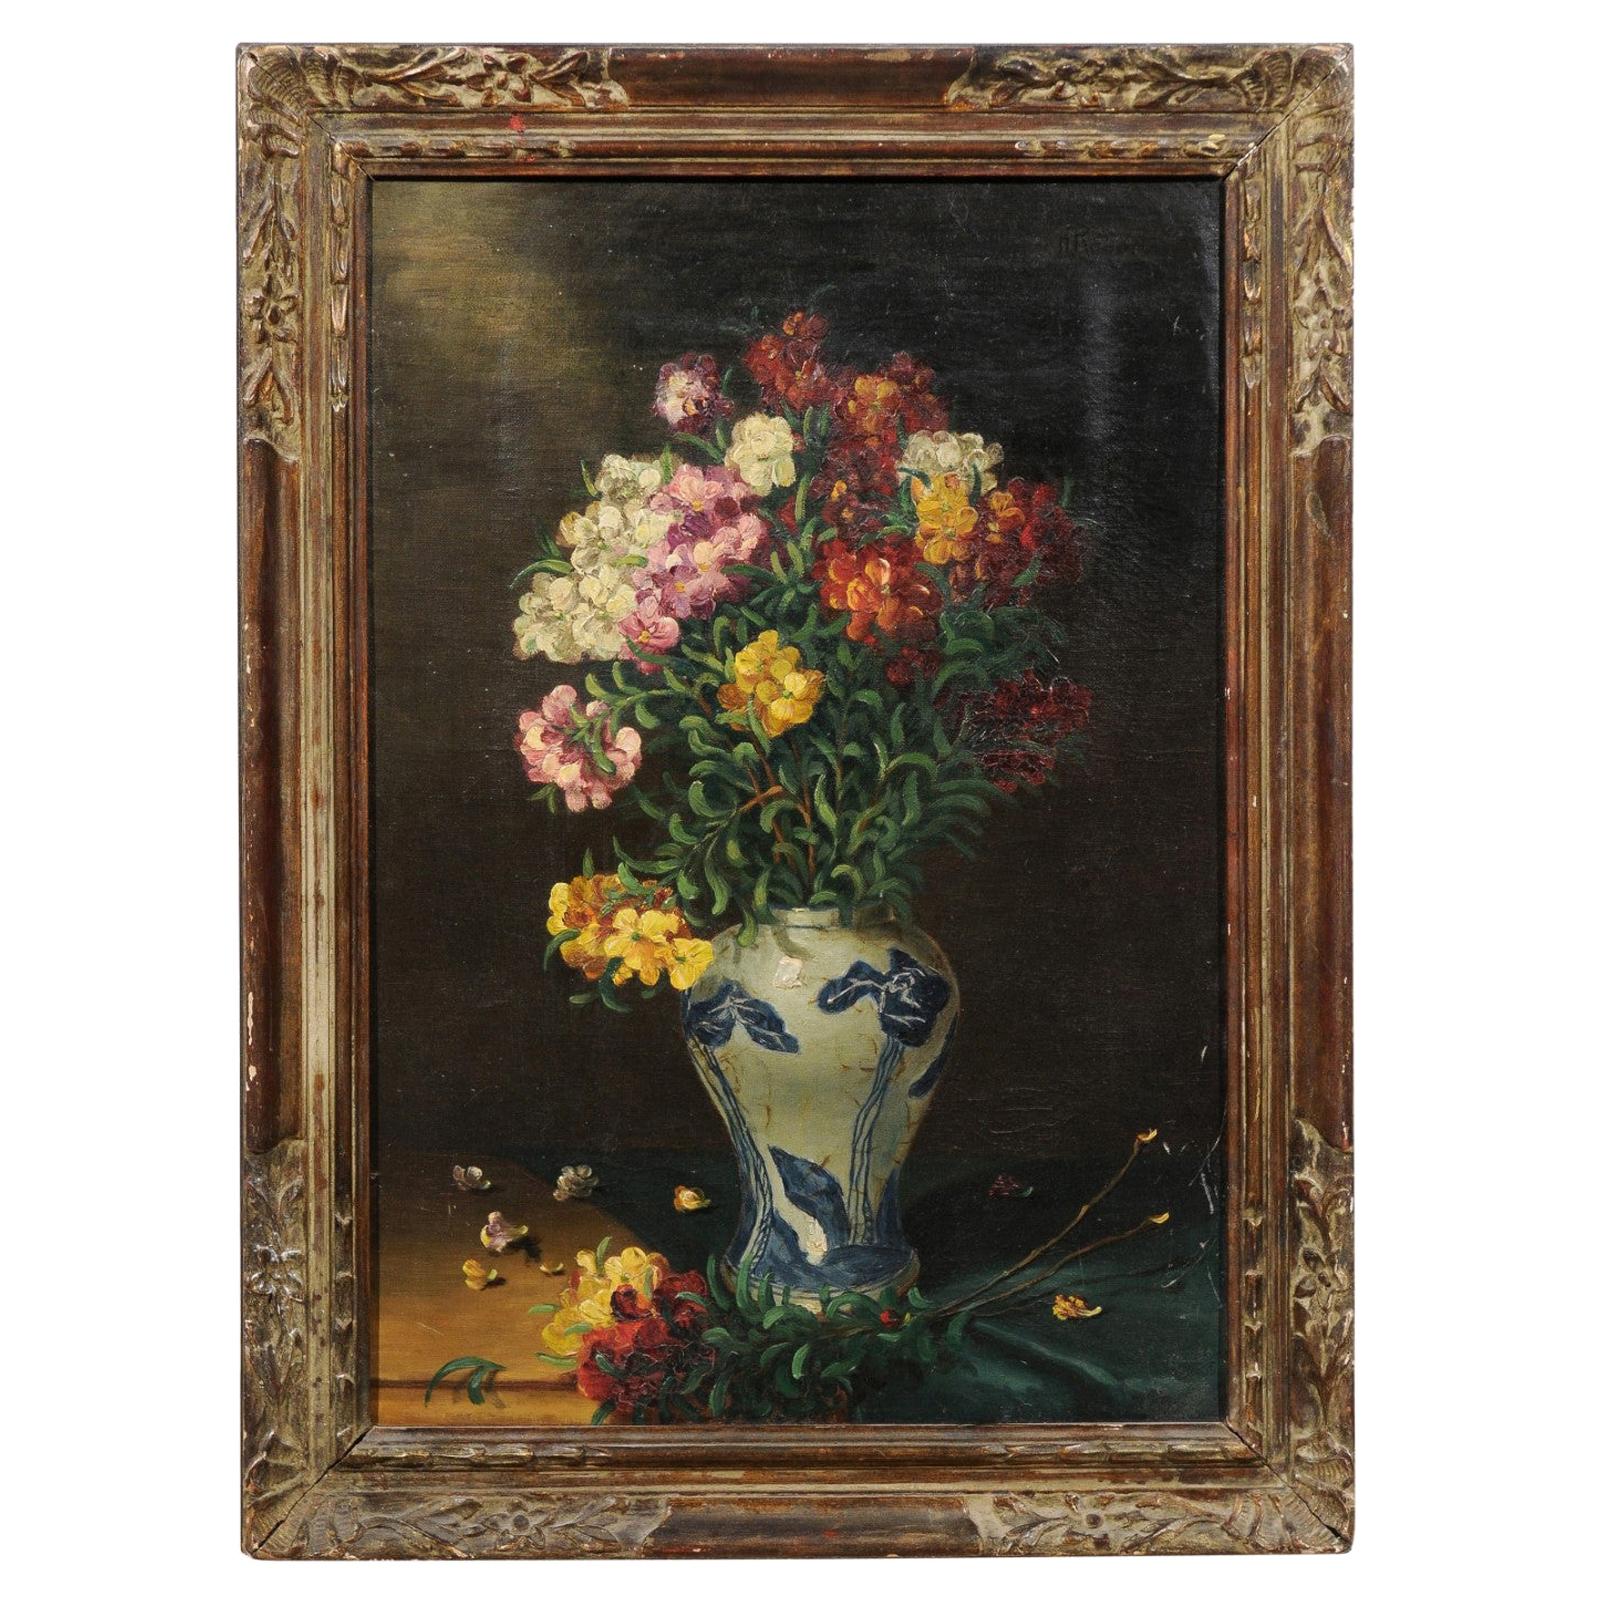 English 19th Century Signed Floral Still-Life with Blue and White Porcelain Vase